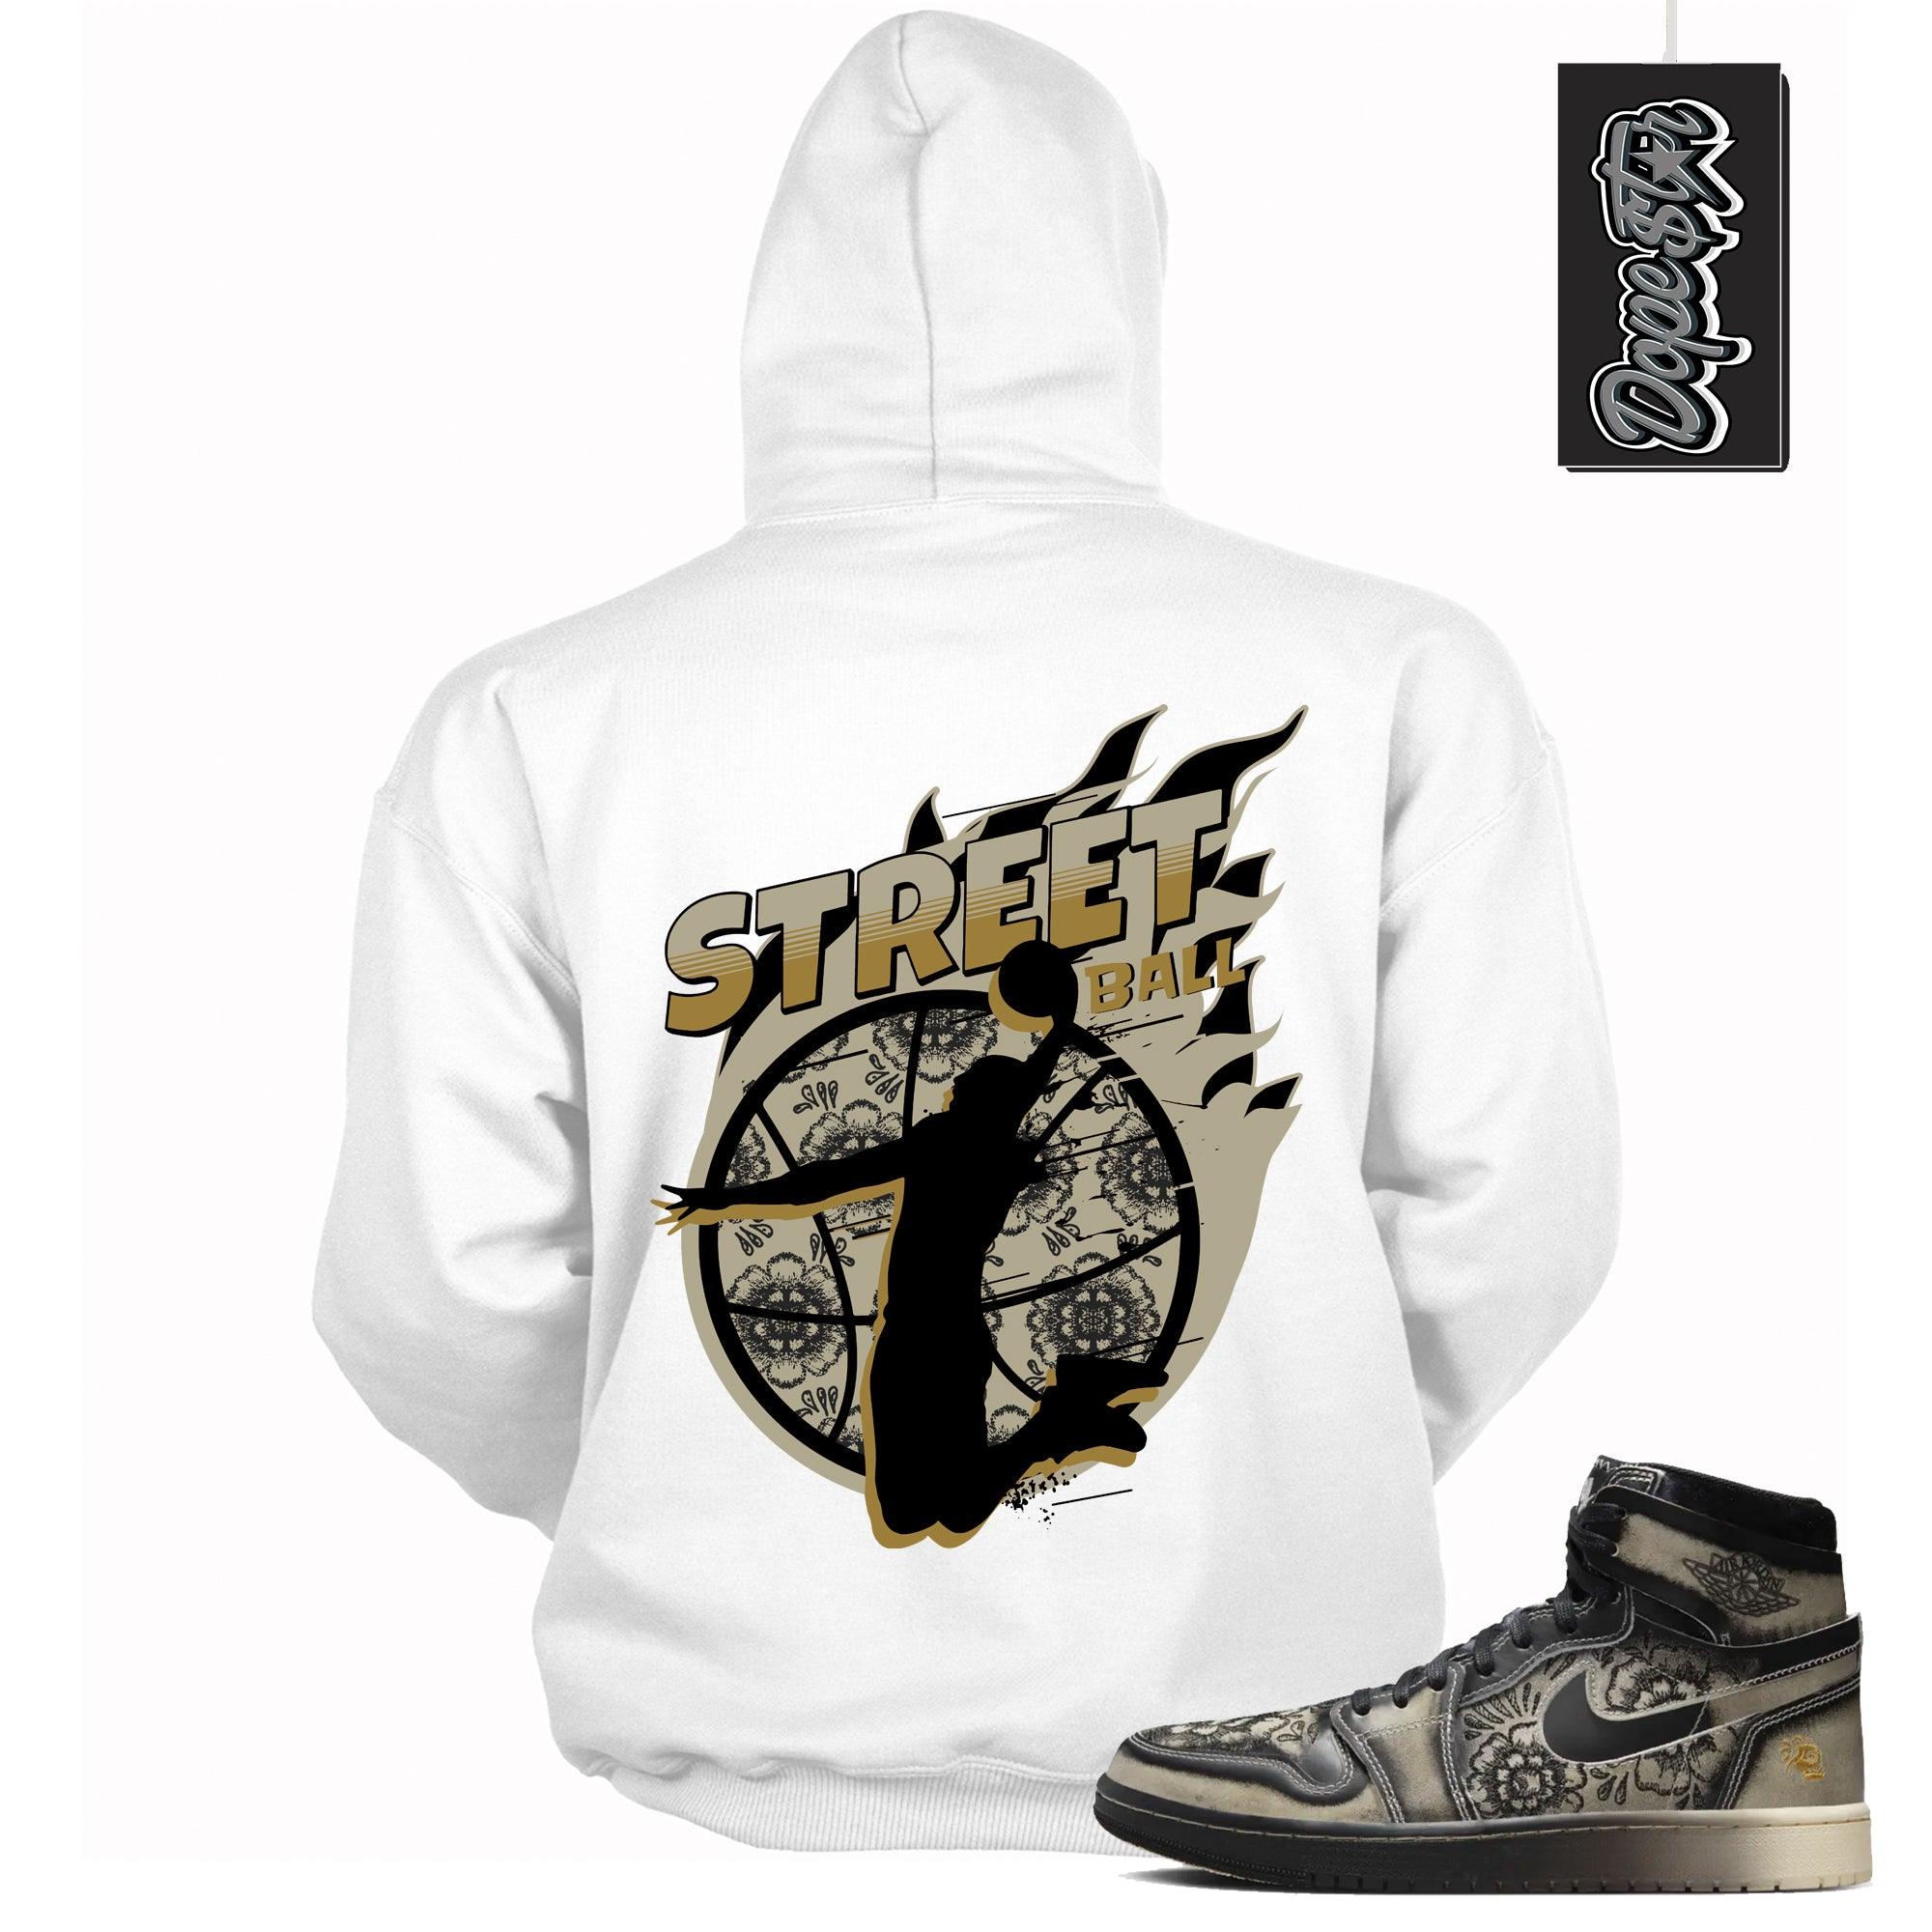 Cool White Graphic Hoodie with “ Street Ball “ print, that perfectly matches Air Jordan 1 High Zoom Comfort 2 Dia de Muertos Black and Pale Ivory sneakers